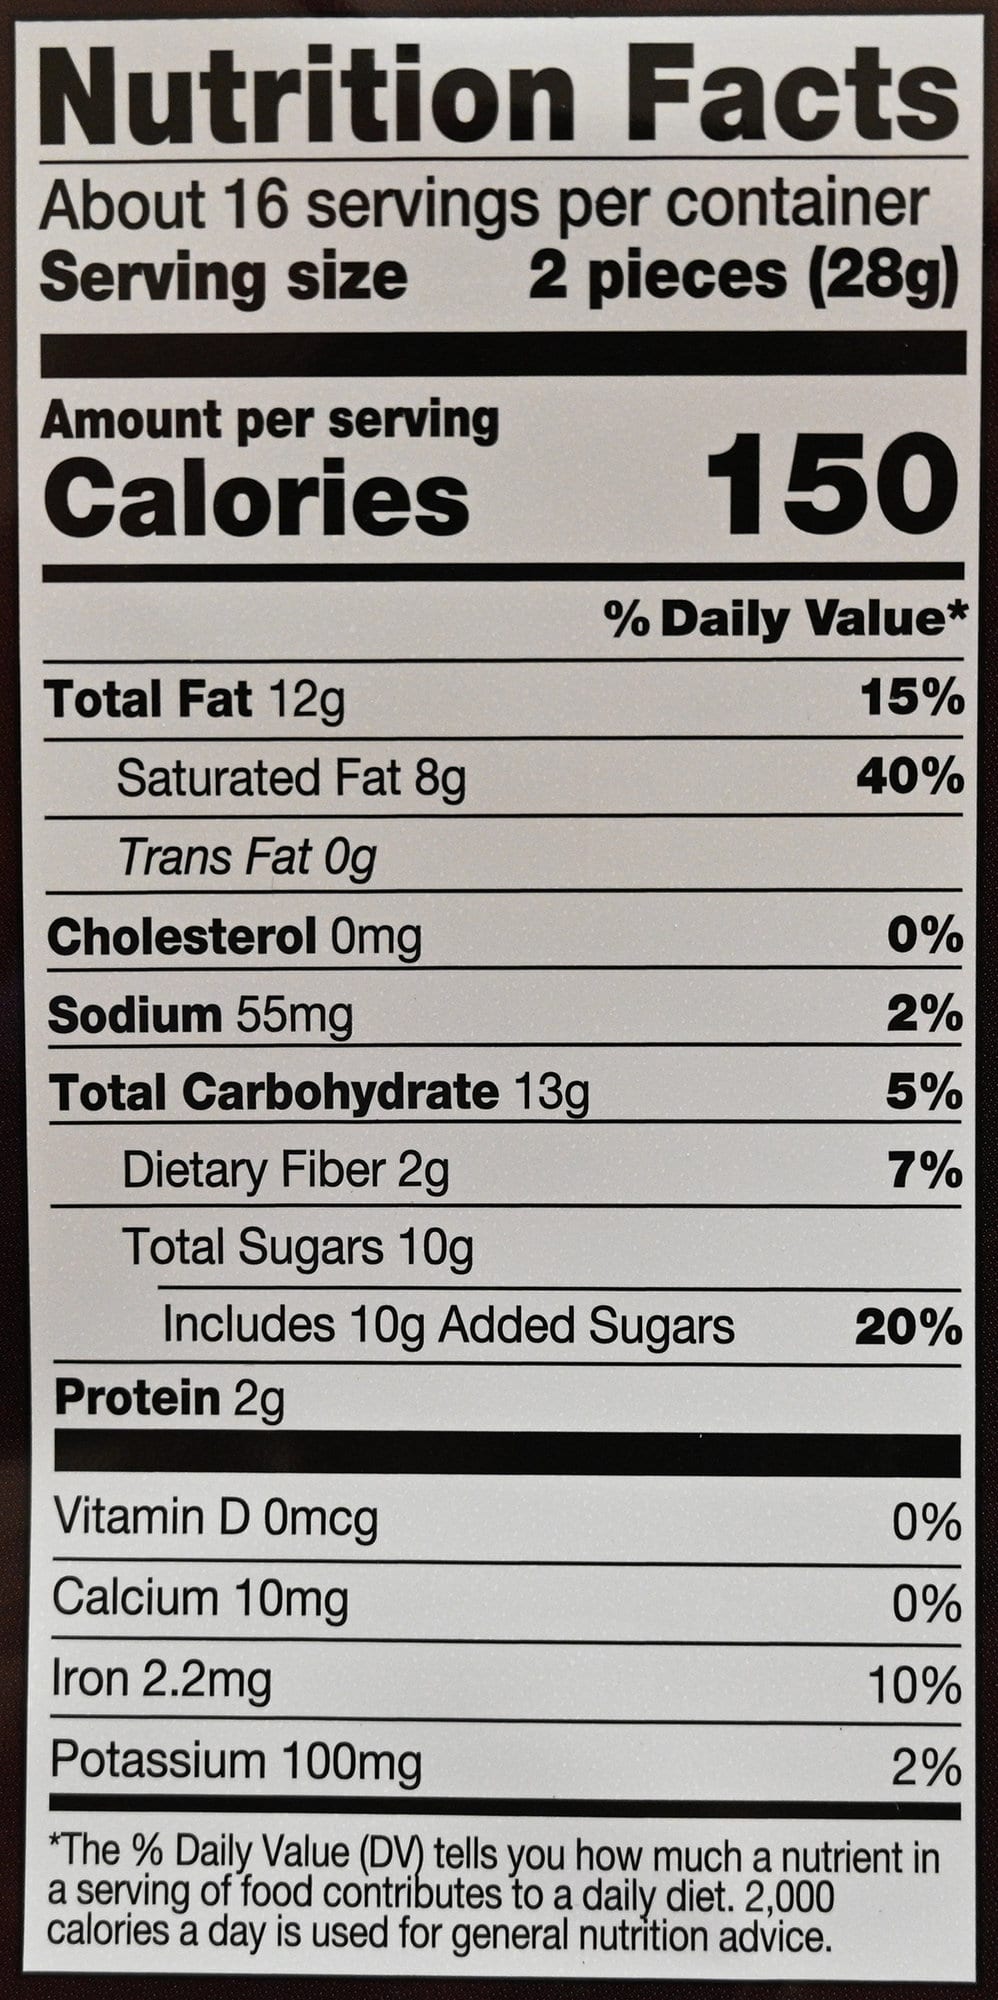 Image of the nutrition facts for the dark chocolate sea salt truffles from the package.